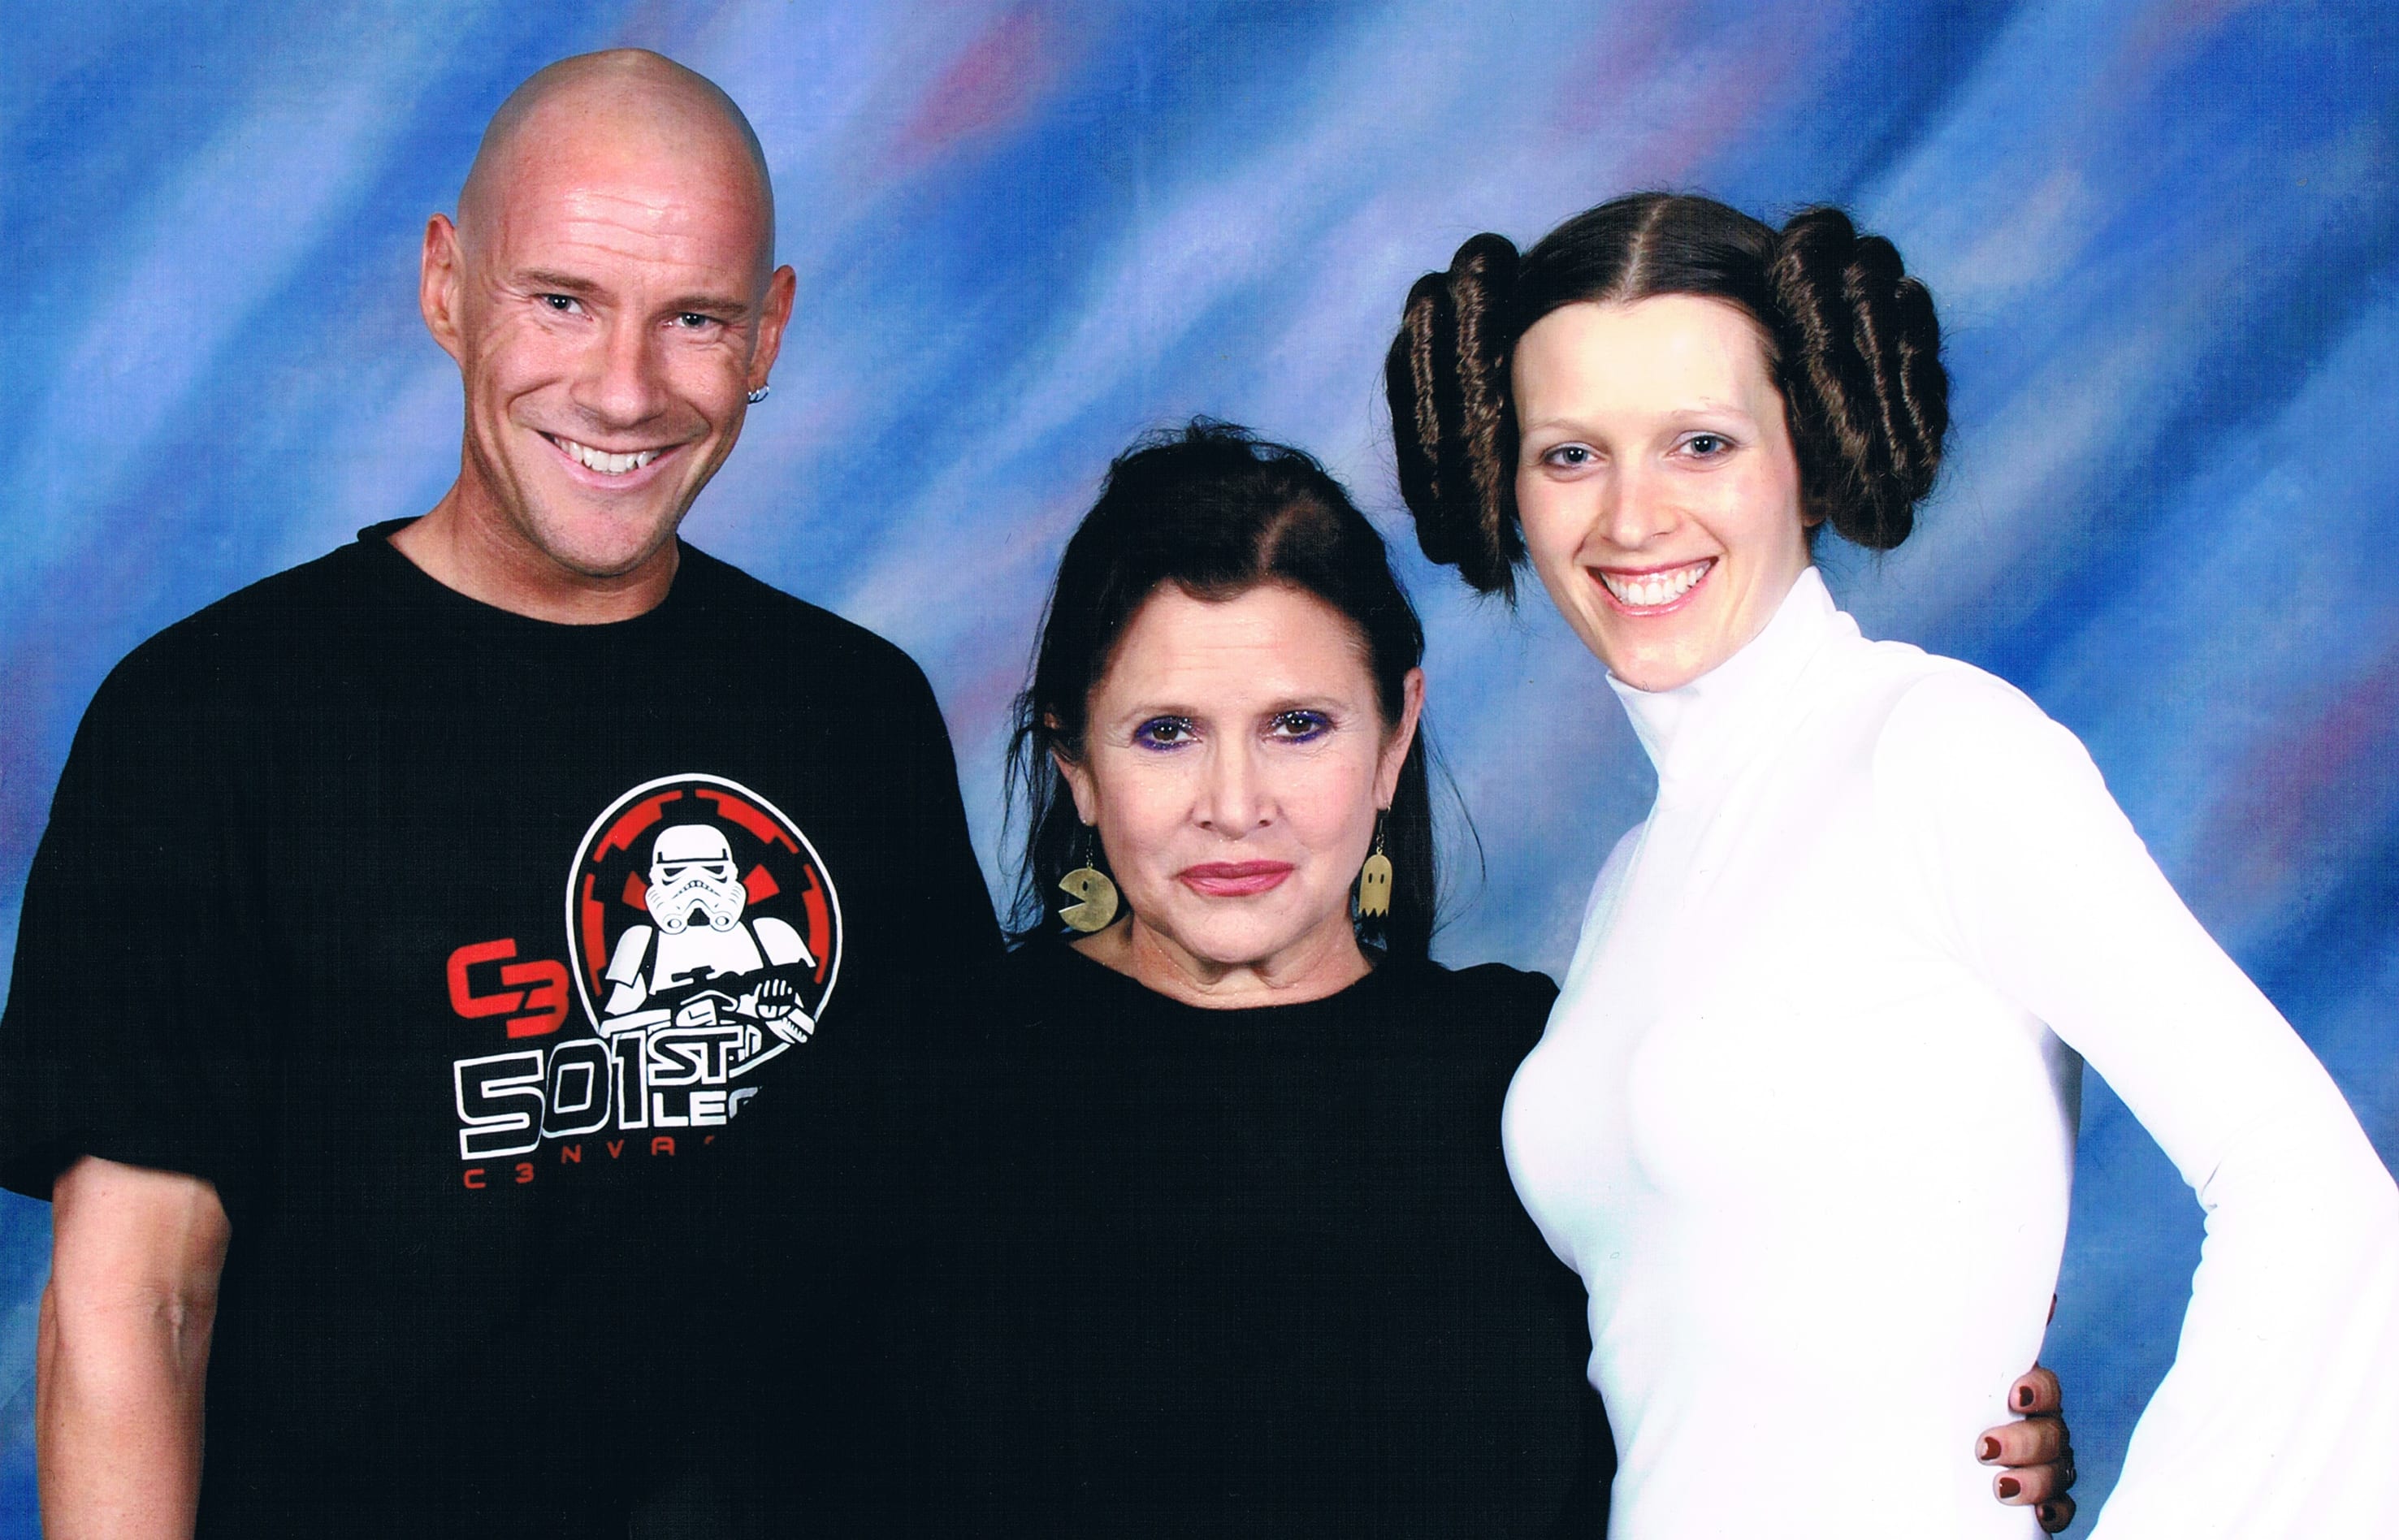 New Zealand Star Wars fans Matt ad Kristy Glasgow with Carrie Fisher in 2011.